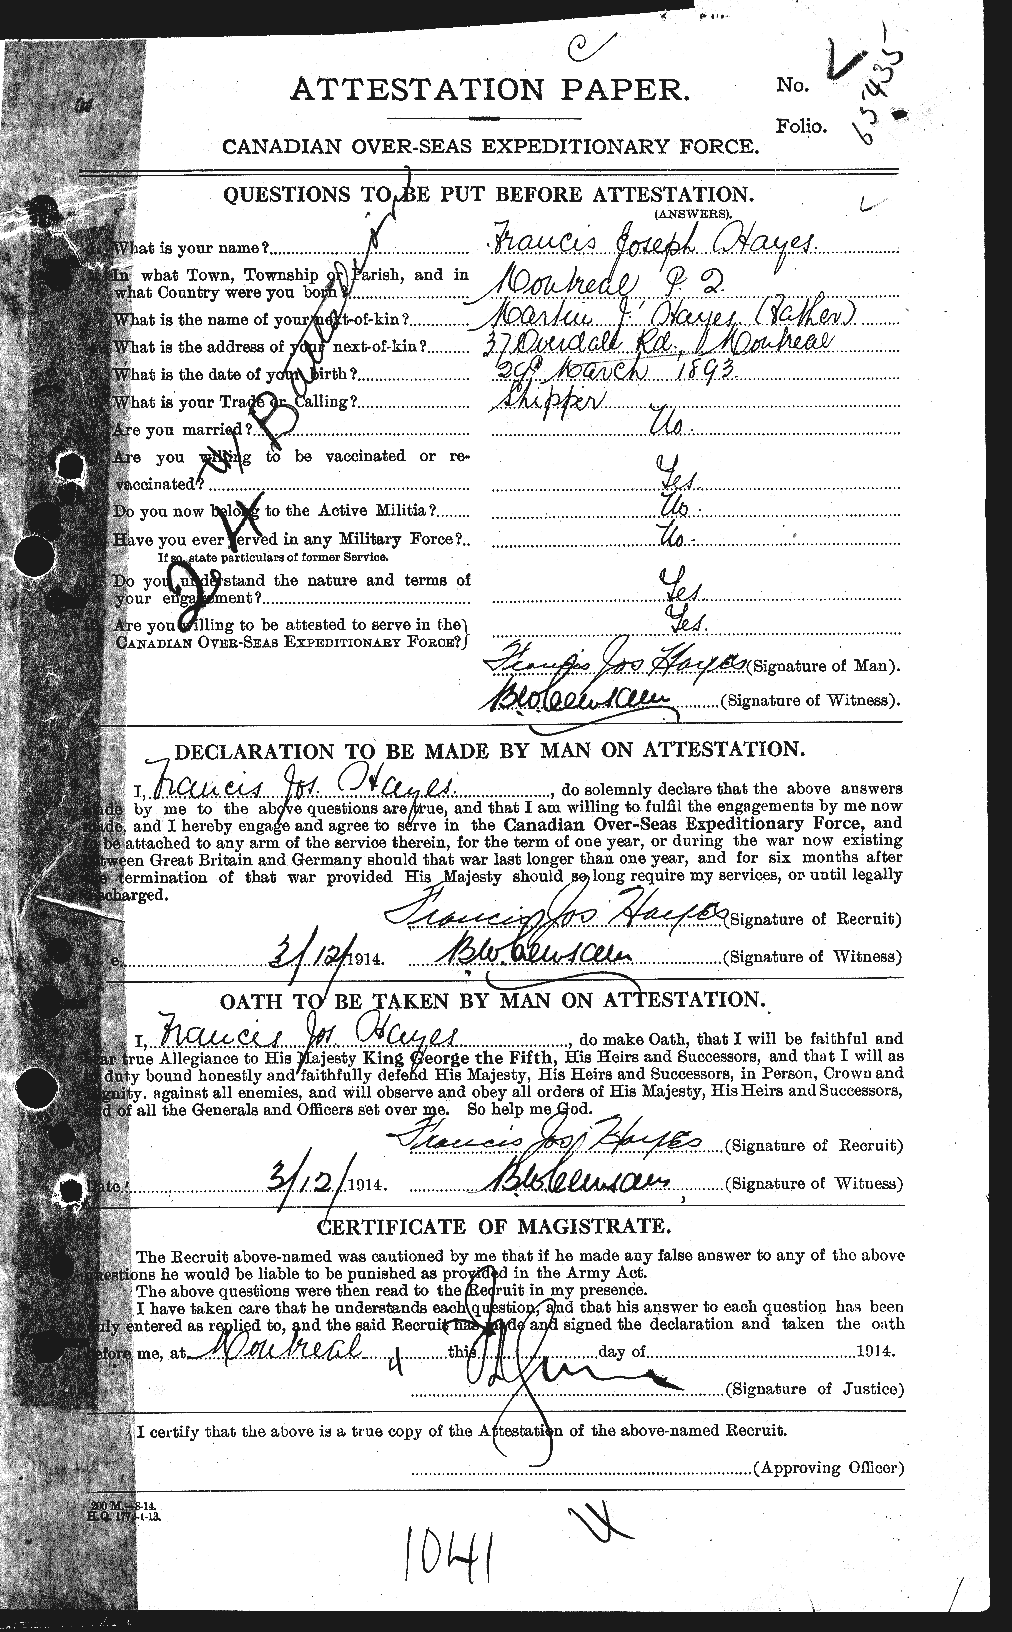 Personnel Records of the First World War - CEF 385449a